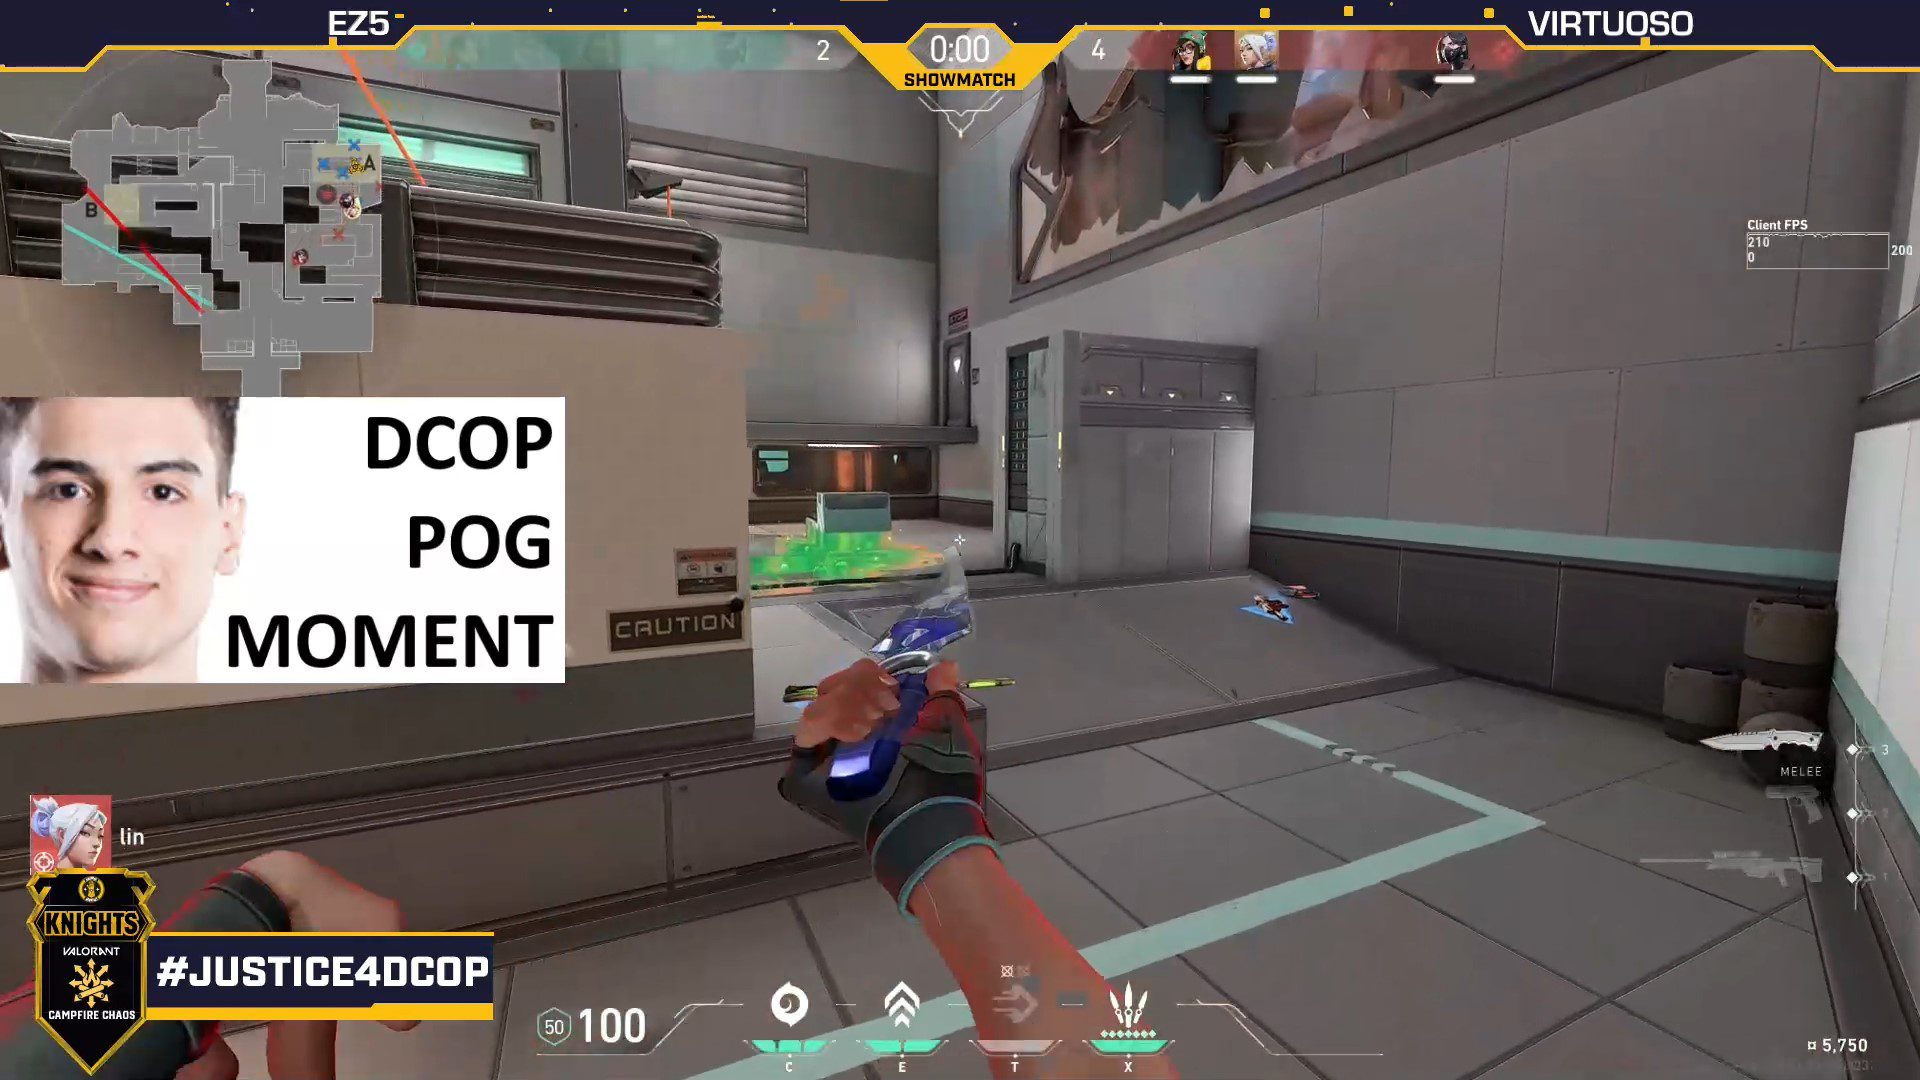 Dcop POG moment insert from #JUSTICE4DCOP showmatch